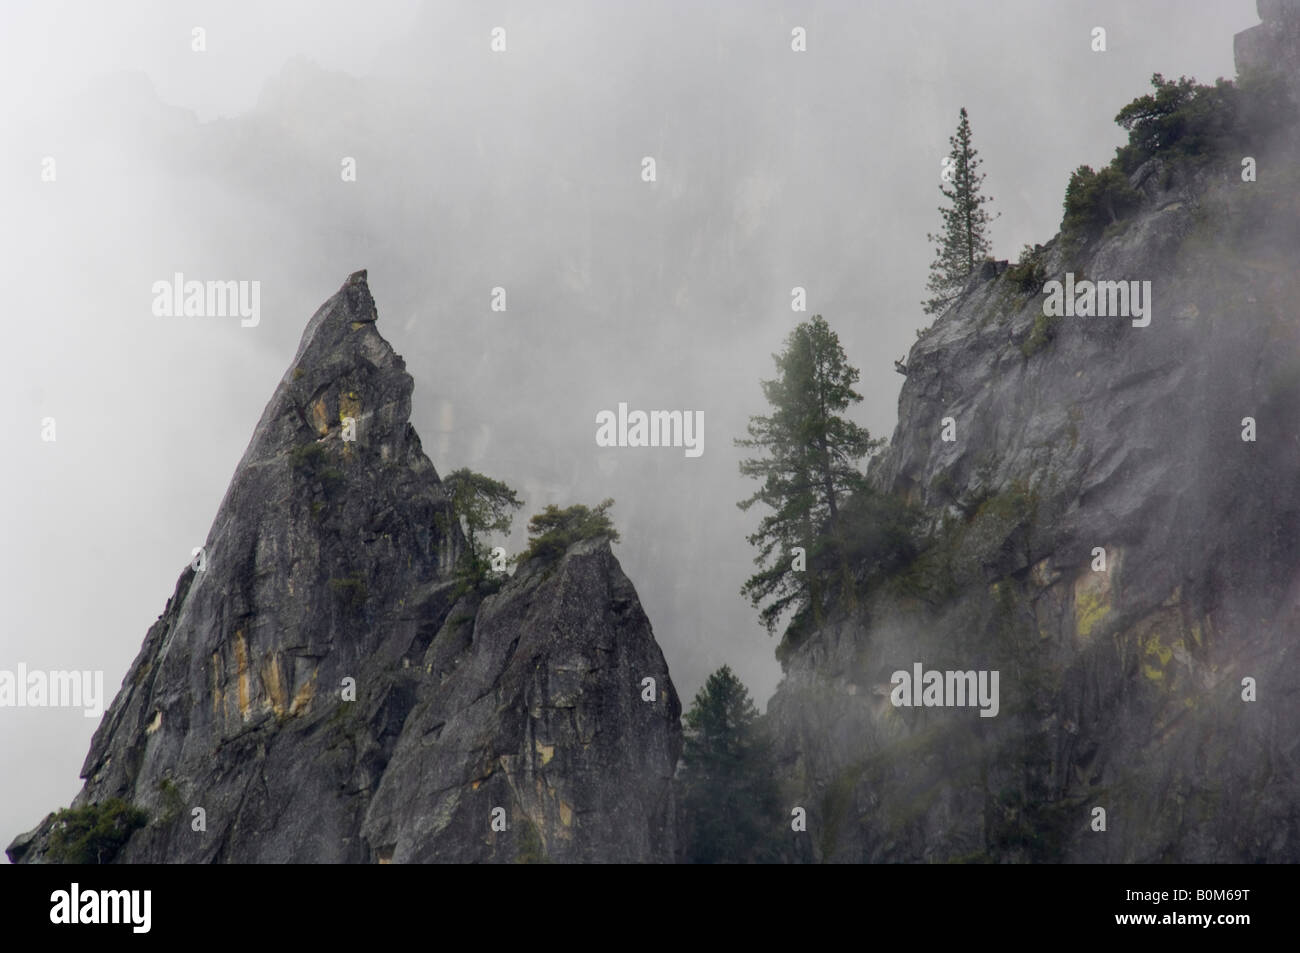 Sharp jagged pointed rock spire and trees in clouds Yosemite National Park California Stock Photo